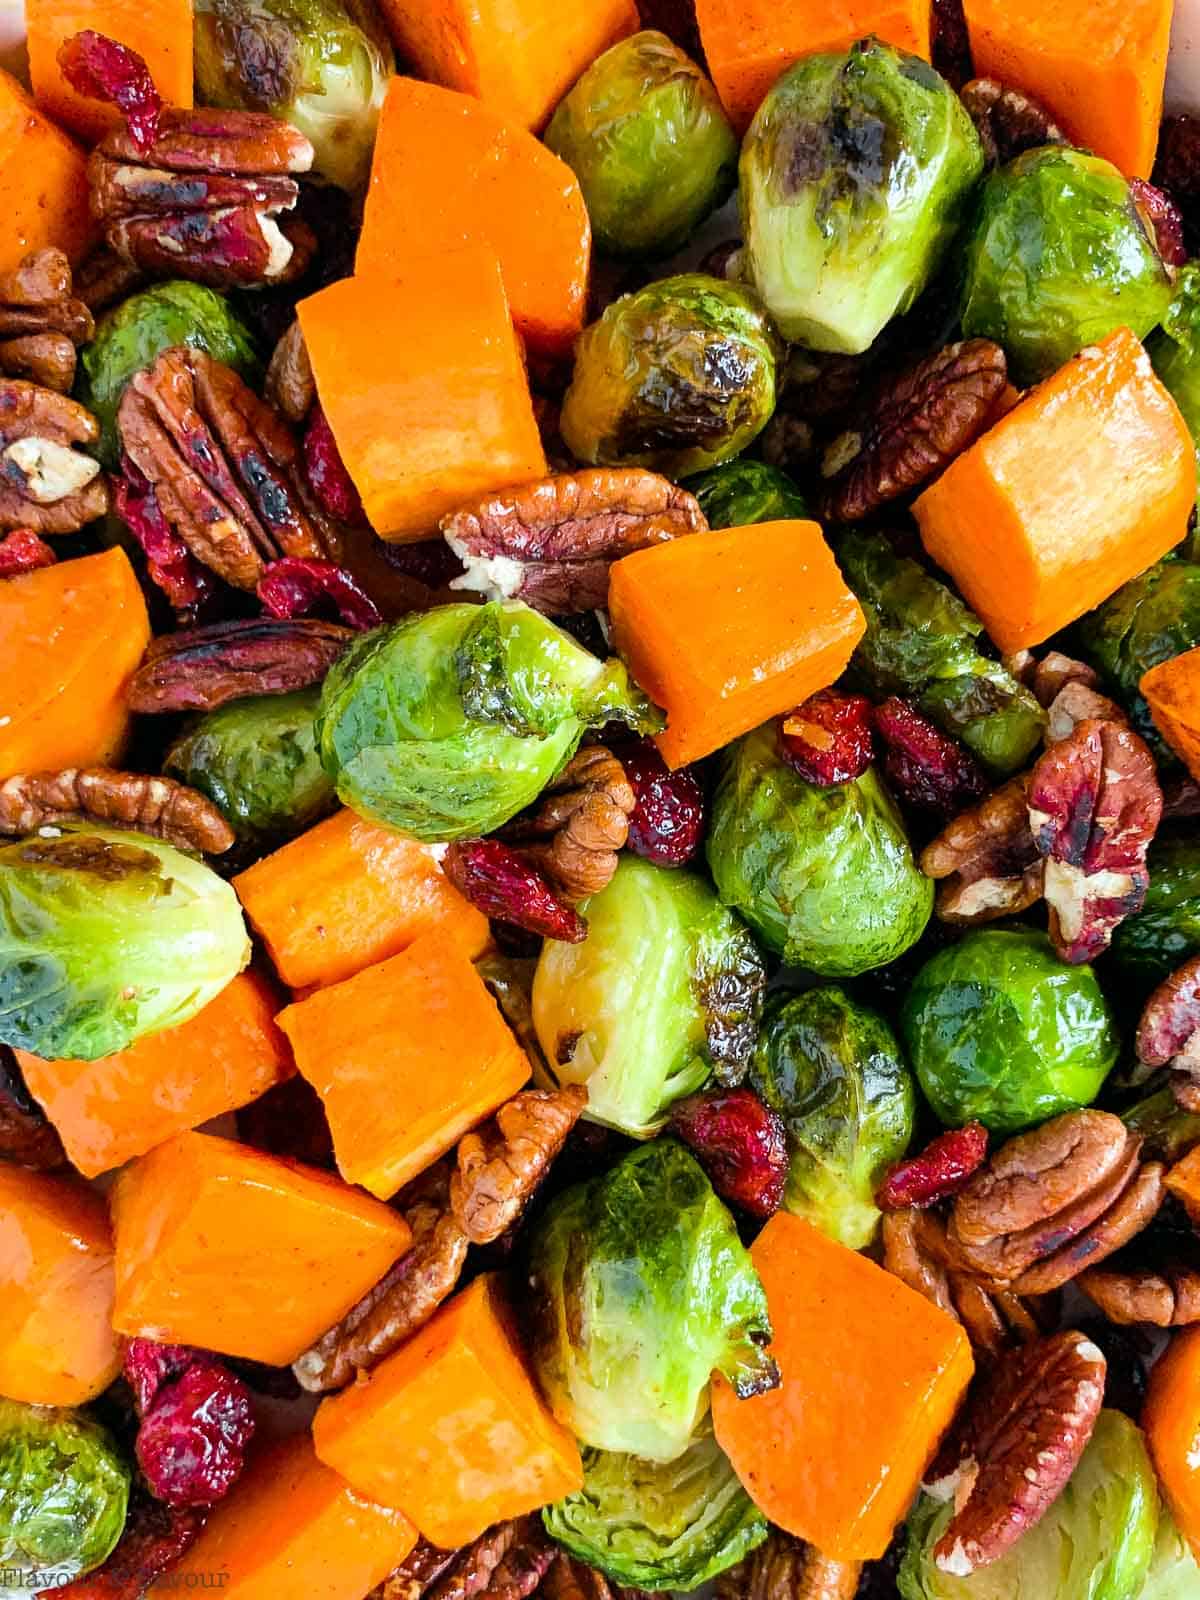 Roasted Brussels Sprouts and Maple Sweet Potatoes with pecans and cranberries.